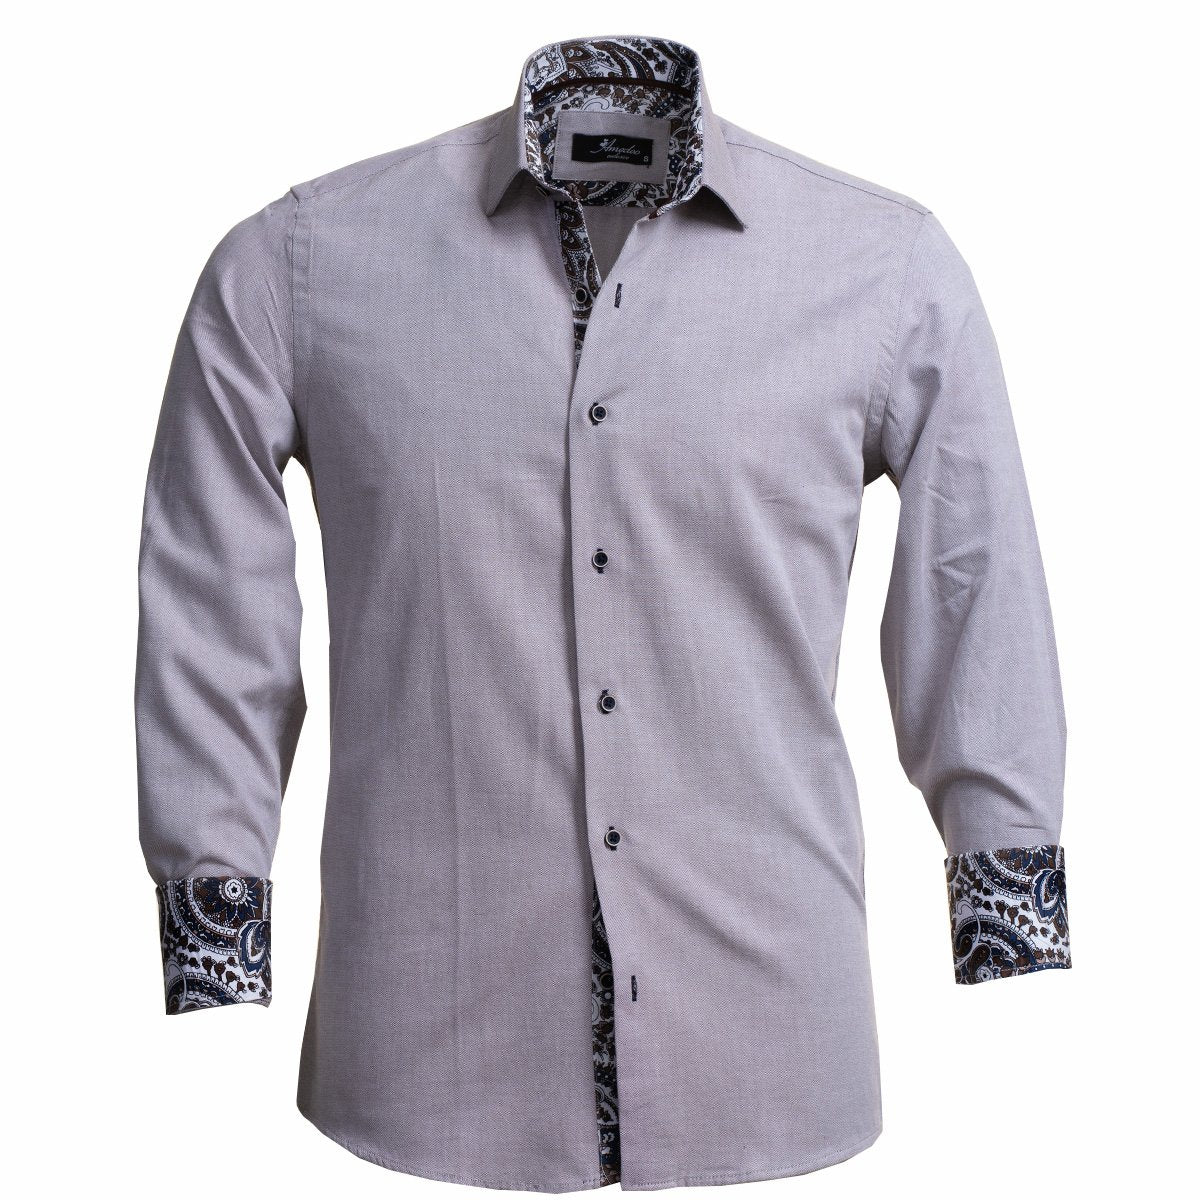 Light Purple Men's Slim Fit French Cuff Dress Shirts with Cufflink Holes - Casual and Formal - Amedeo Exclusive